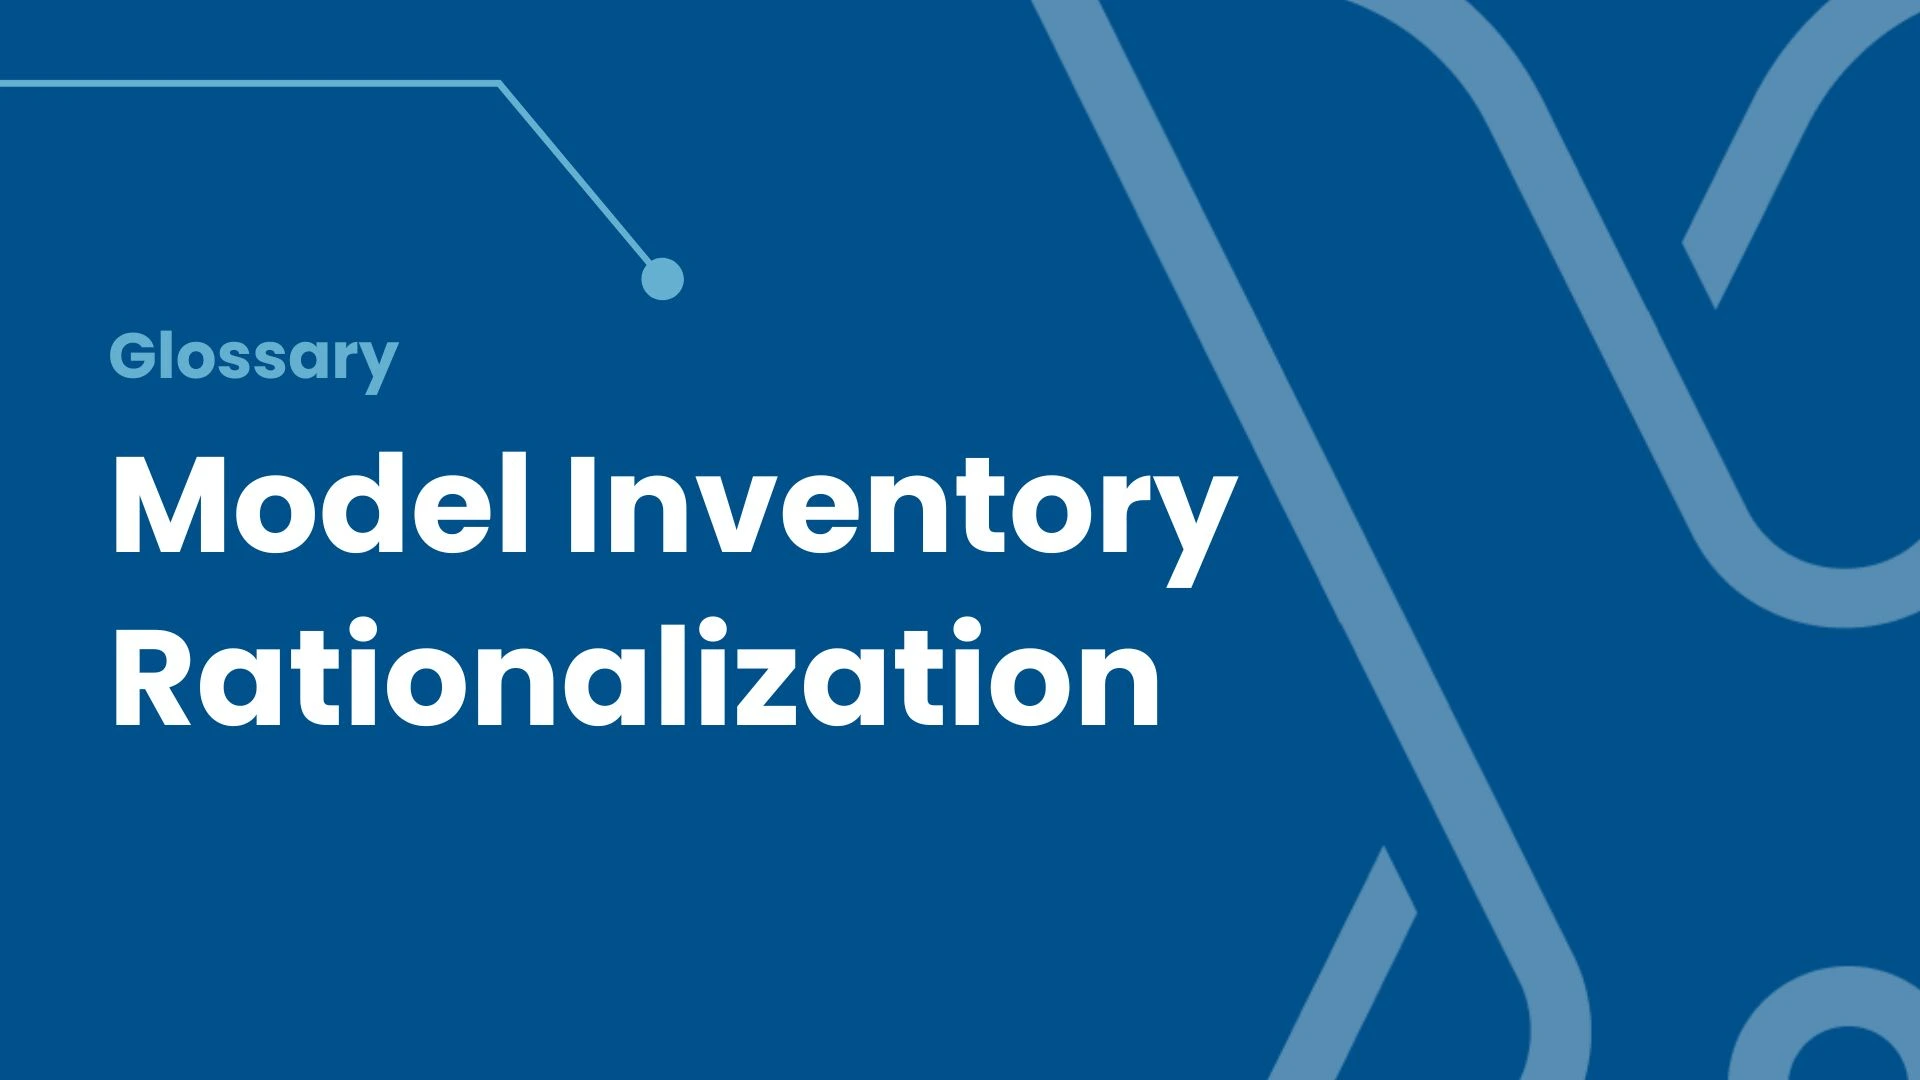 What is model inventory rationalization?